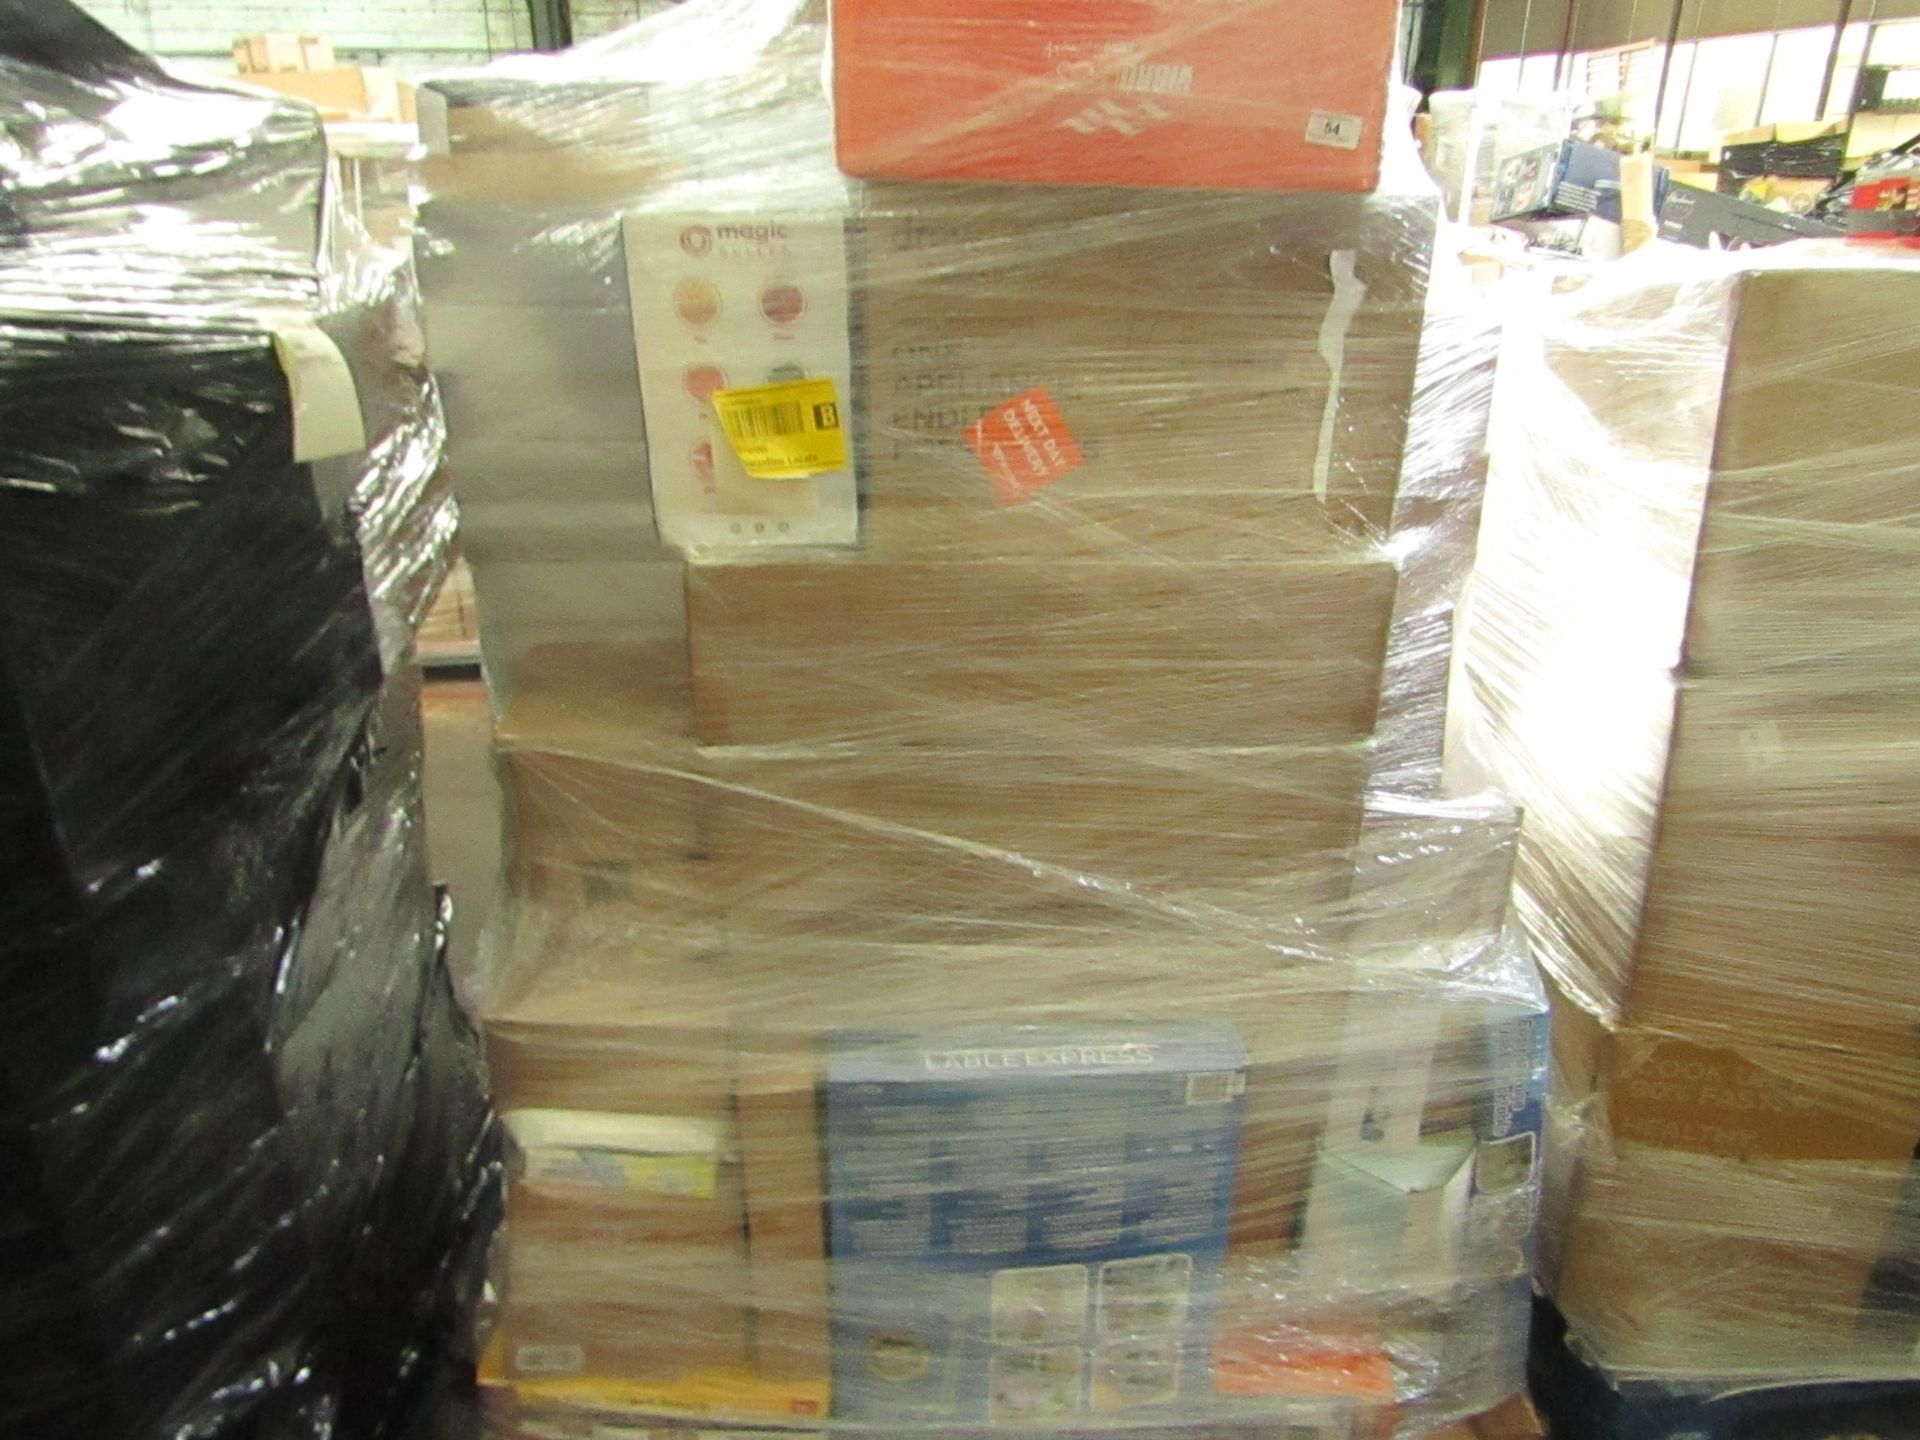 | 1X | PALLET OF RAW CUSTOMER ELECTRICAL RETURNS FROM A LARGE ONLINE RETAILER | UNCHECKED RETURNS |